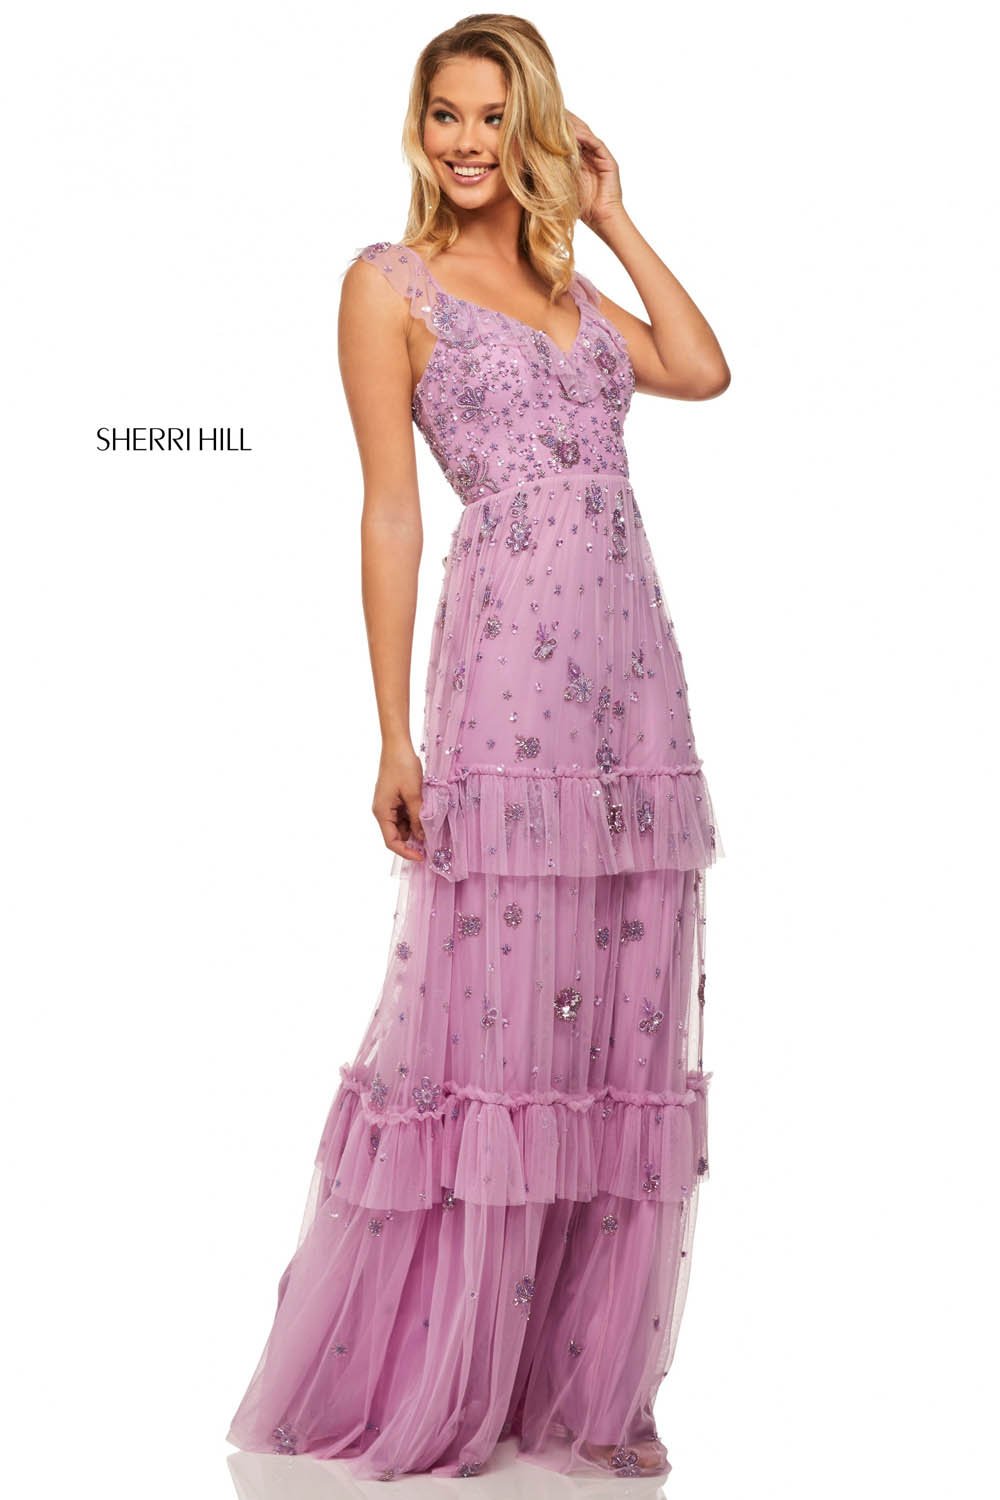 Sherri Hill 52929 dress images in these colors: Lilac.